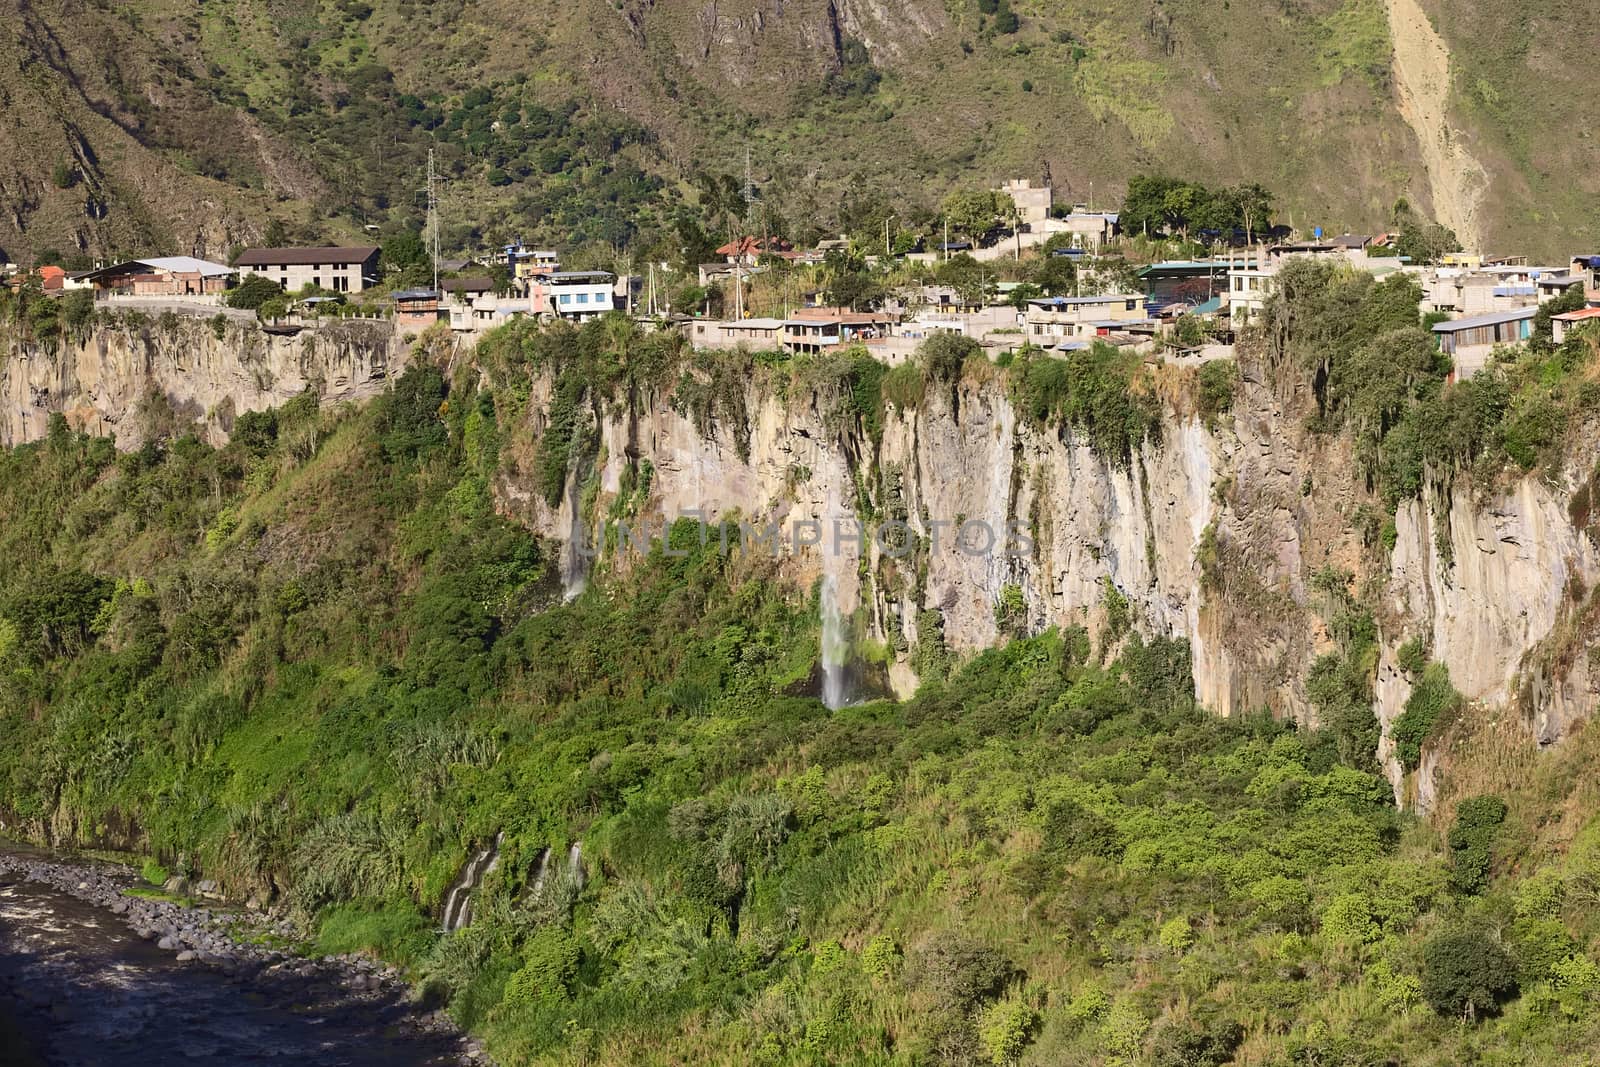 The Pastaza River and the small town of Banos in Ecuador on the cliffs with some waterfalls dropping down 